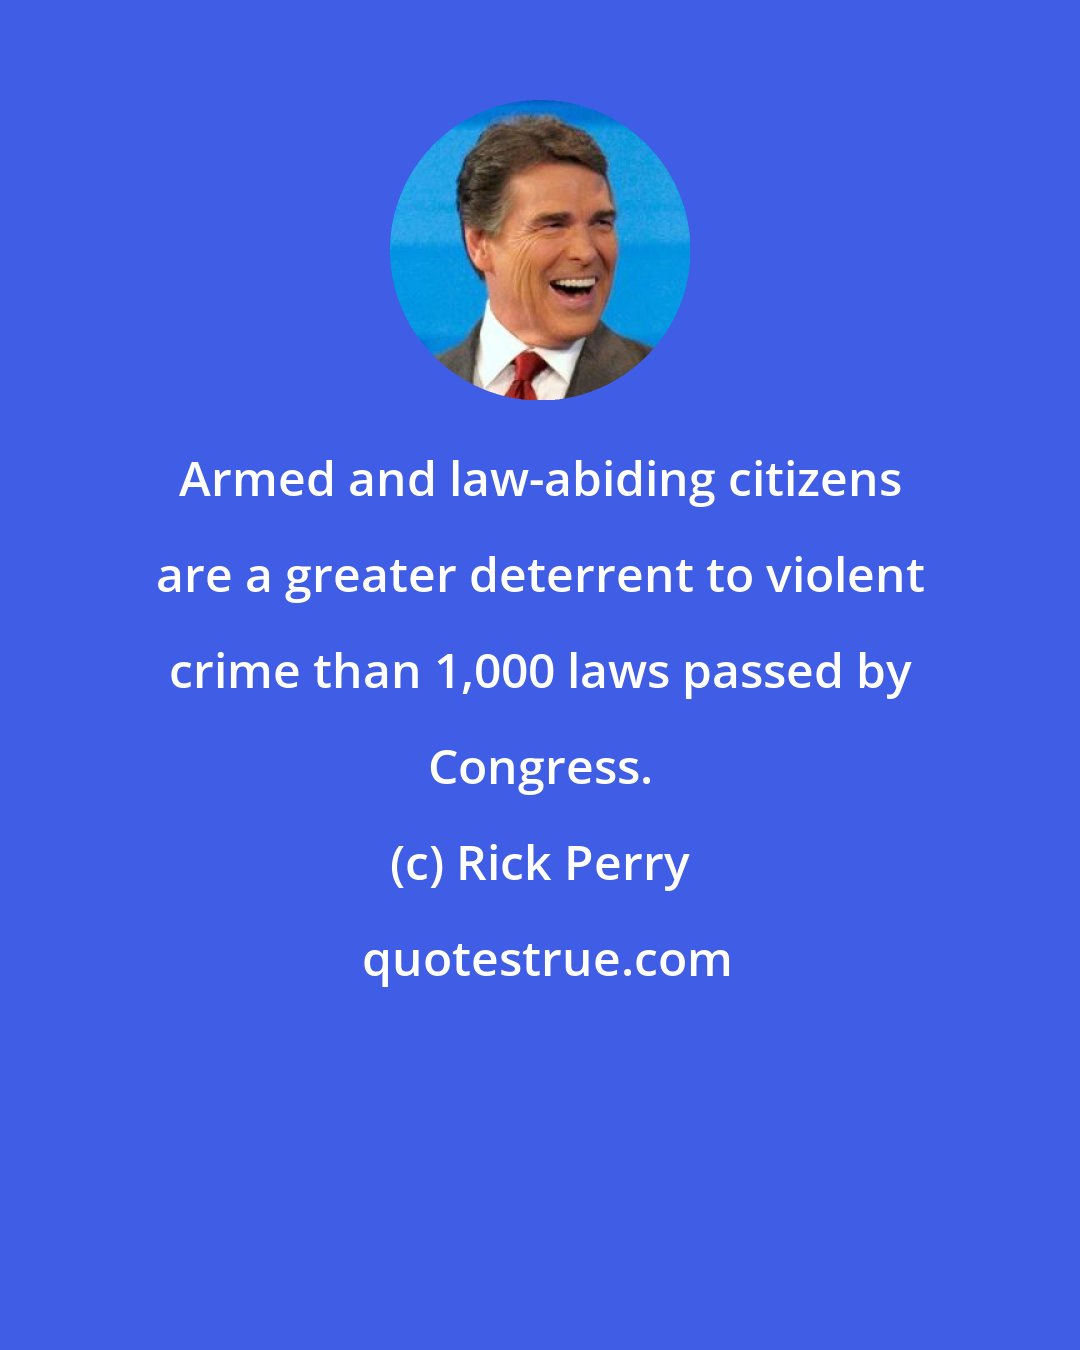 Rick Perry: Armed and law-abiding citizens are a greater deterrent to violent crime than 1,000 laws passed by Congress.